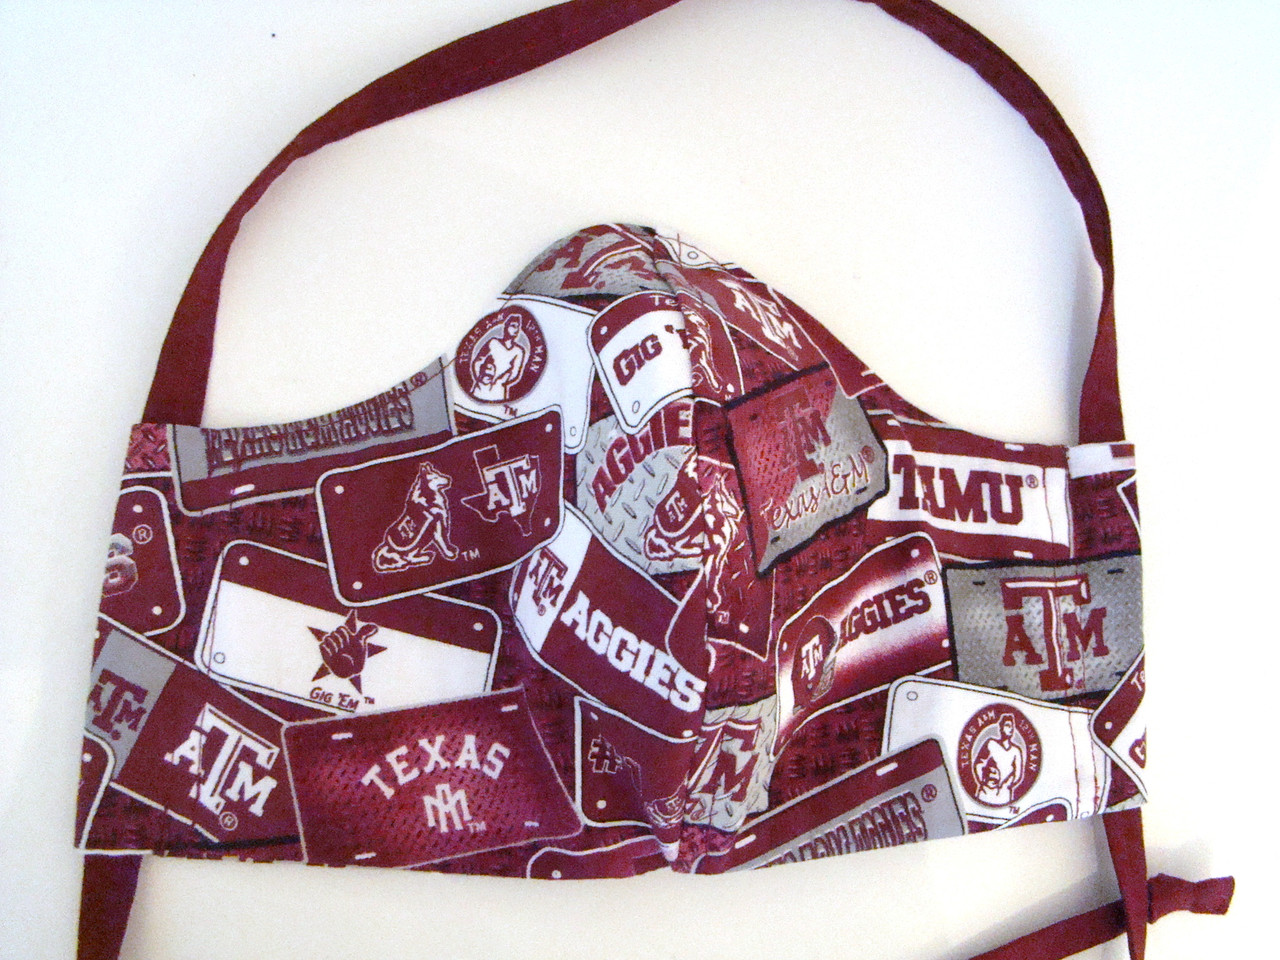 Texas A&M Mask in Texas A&M License Plates Fabric